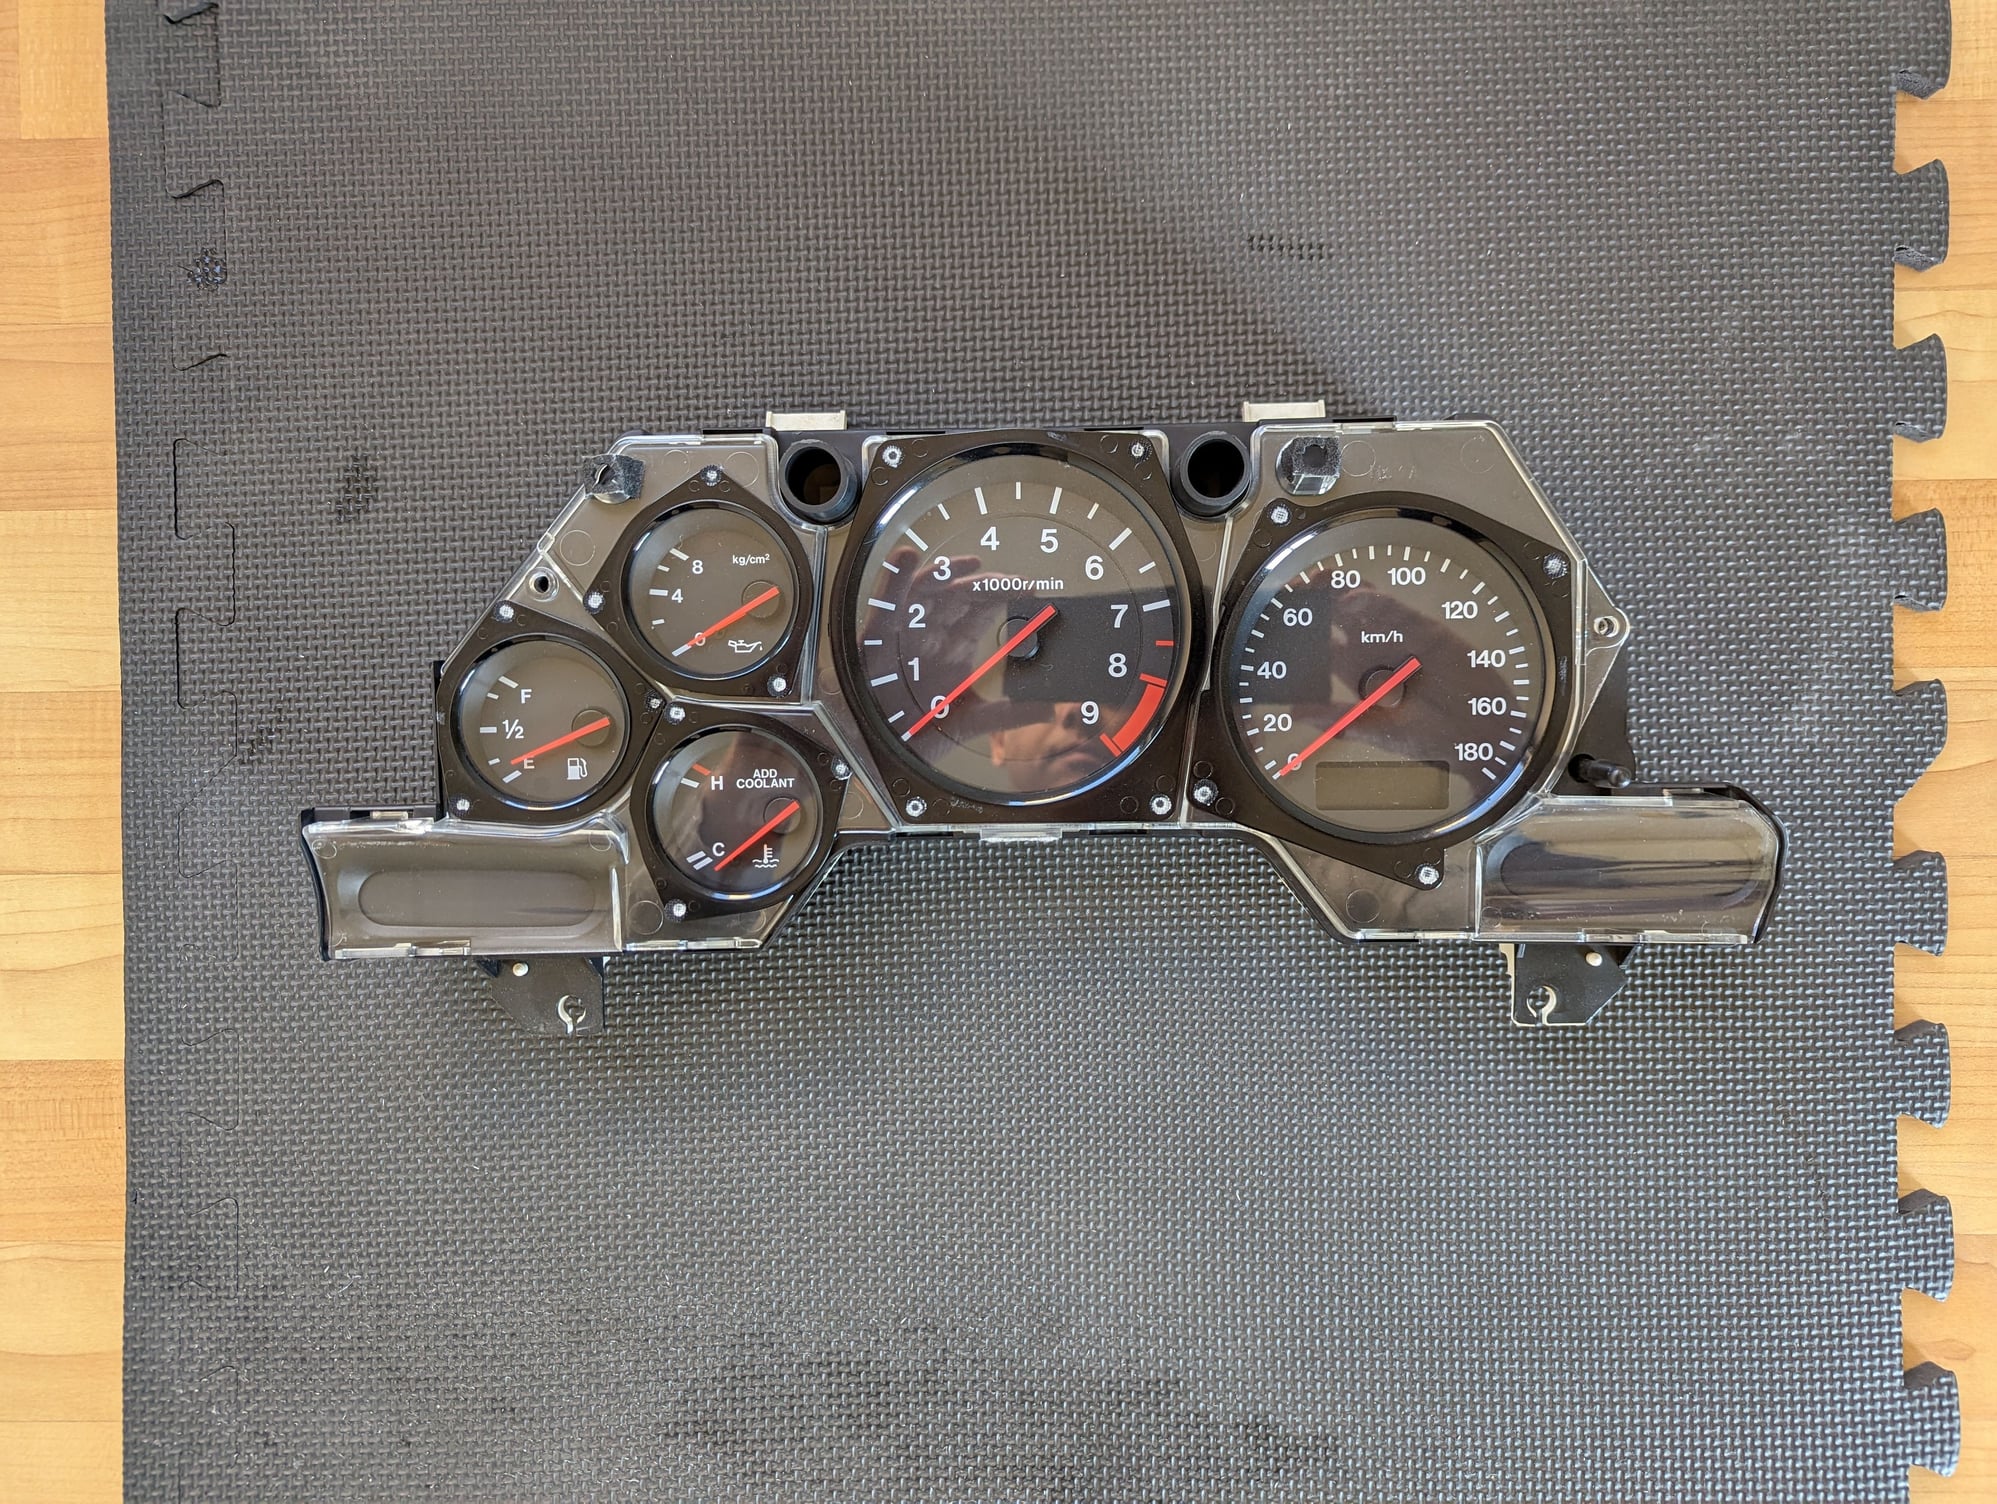 Miscellaneous - FS: JDM Instrument Cluster, Tach, Black-Bezel Gauge Lens - Used - 1993 to 1995 Mazda RX-7 - Winchester, CA 92596, United States